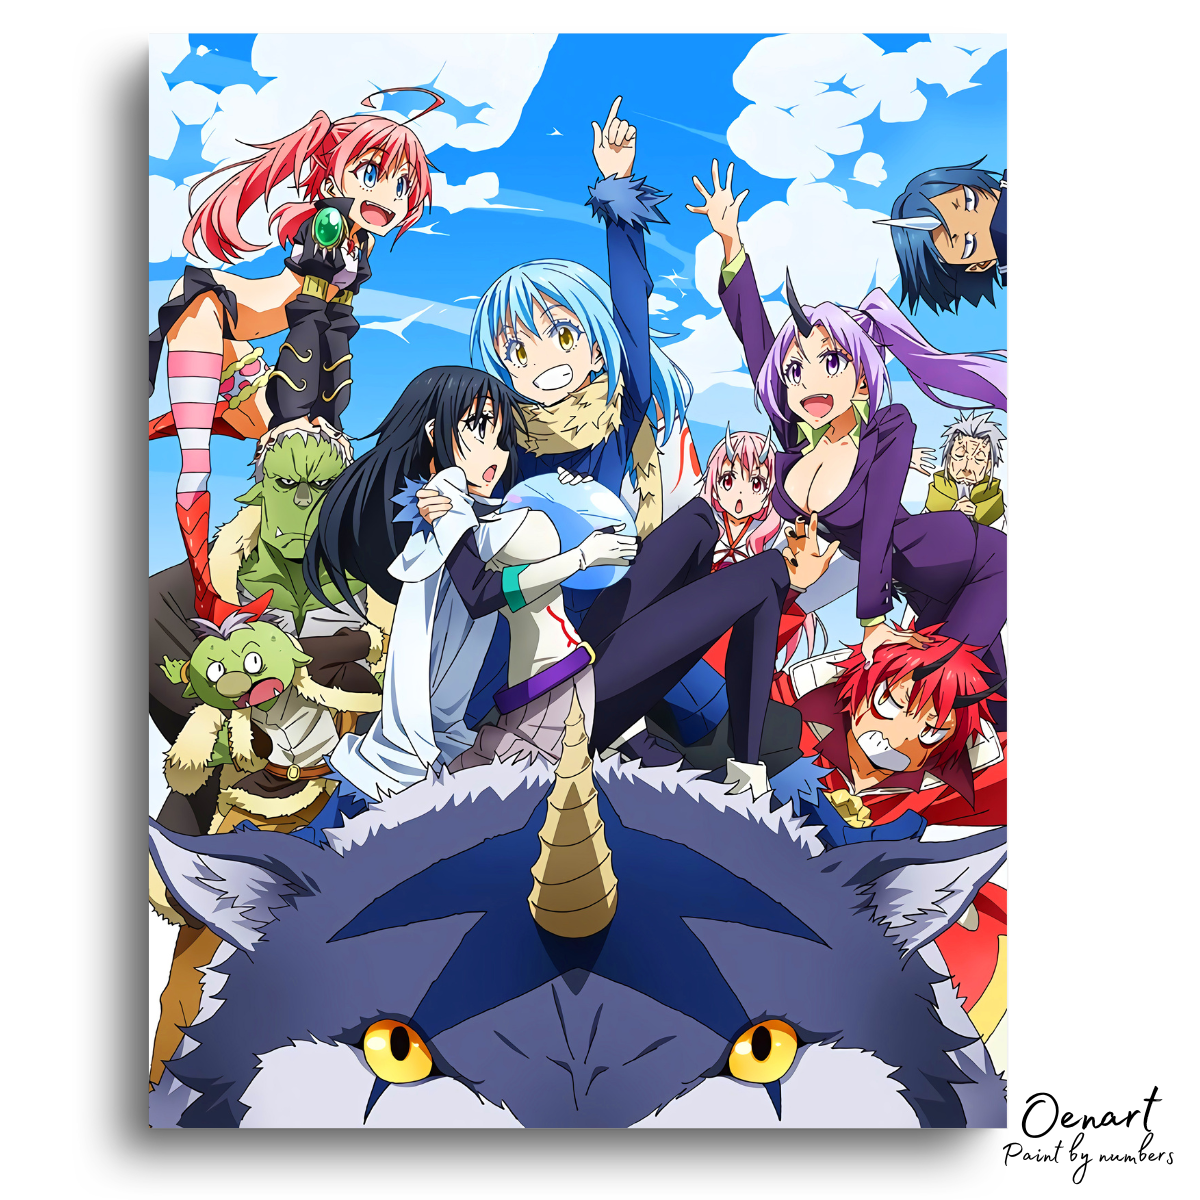 That Time I Got Reincarnated as a Slime - Anime Painting Set